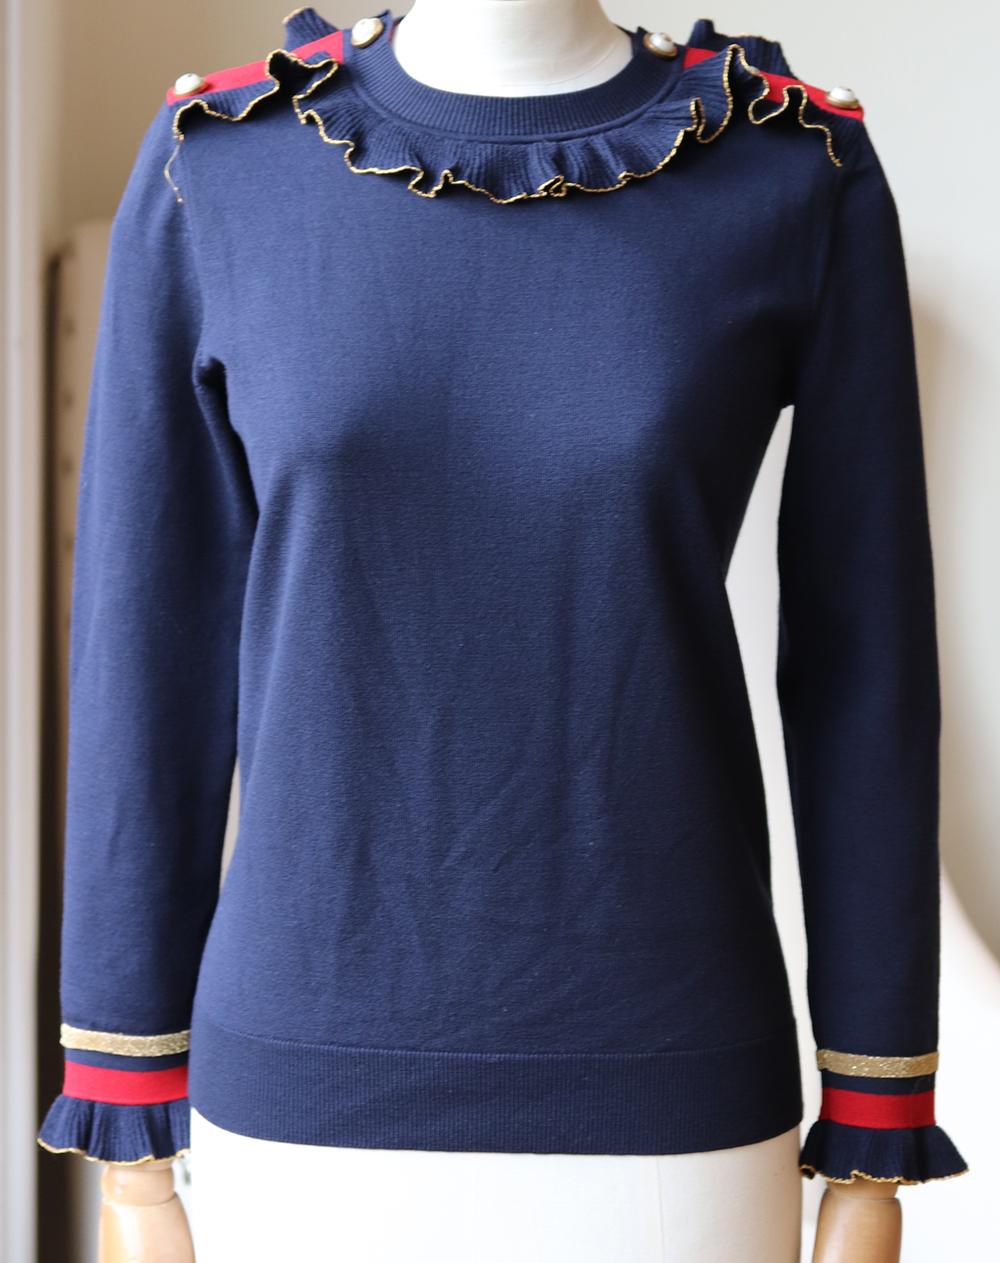 Gucci's sweater is spun from soft navy merino wool, blended with a hint of stretch for comfort. 
It has a lovely ruffle collar, Renaissance-inspired gold-trimmed ruffles and contrasting red stripes.
Navy, red and gold merino wool-blend.
Slip on.
93%